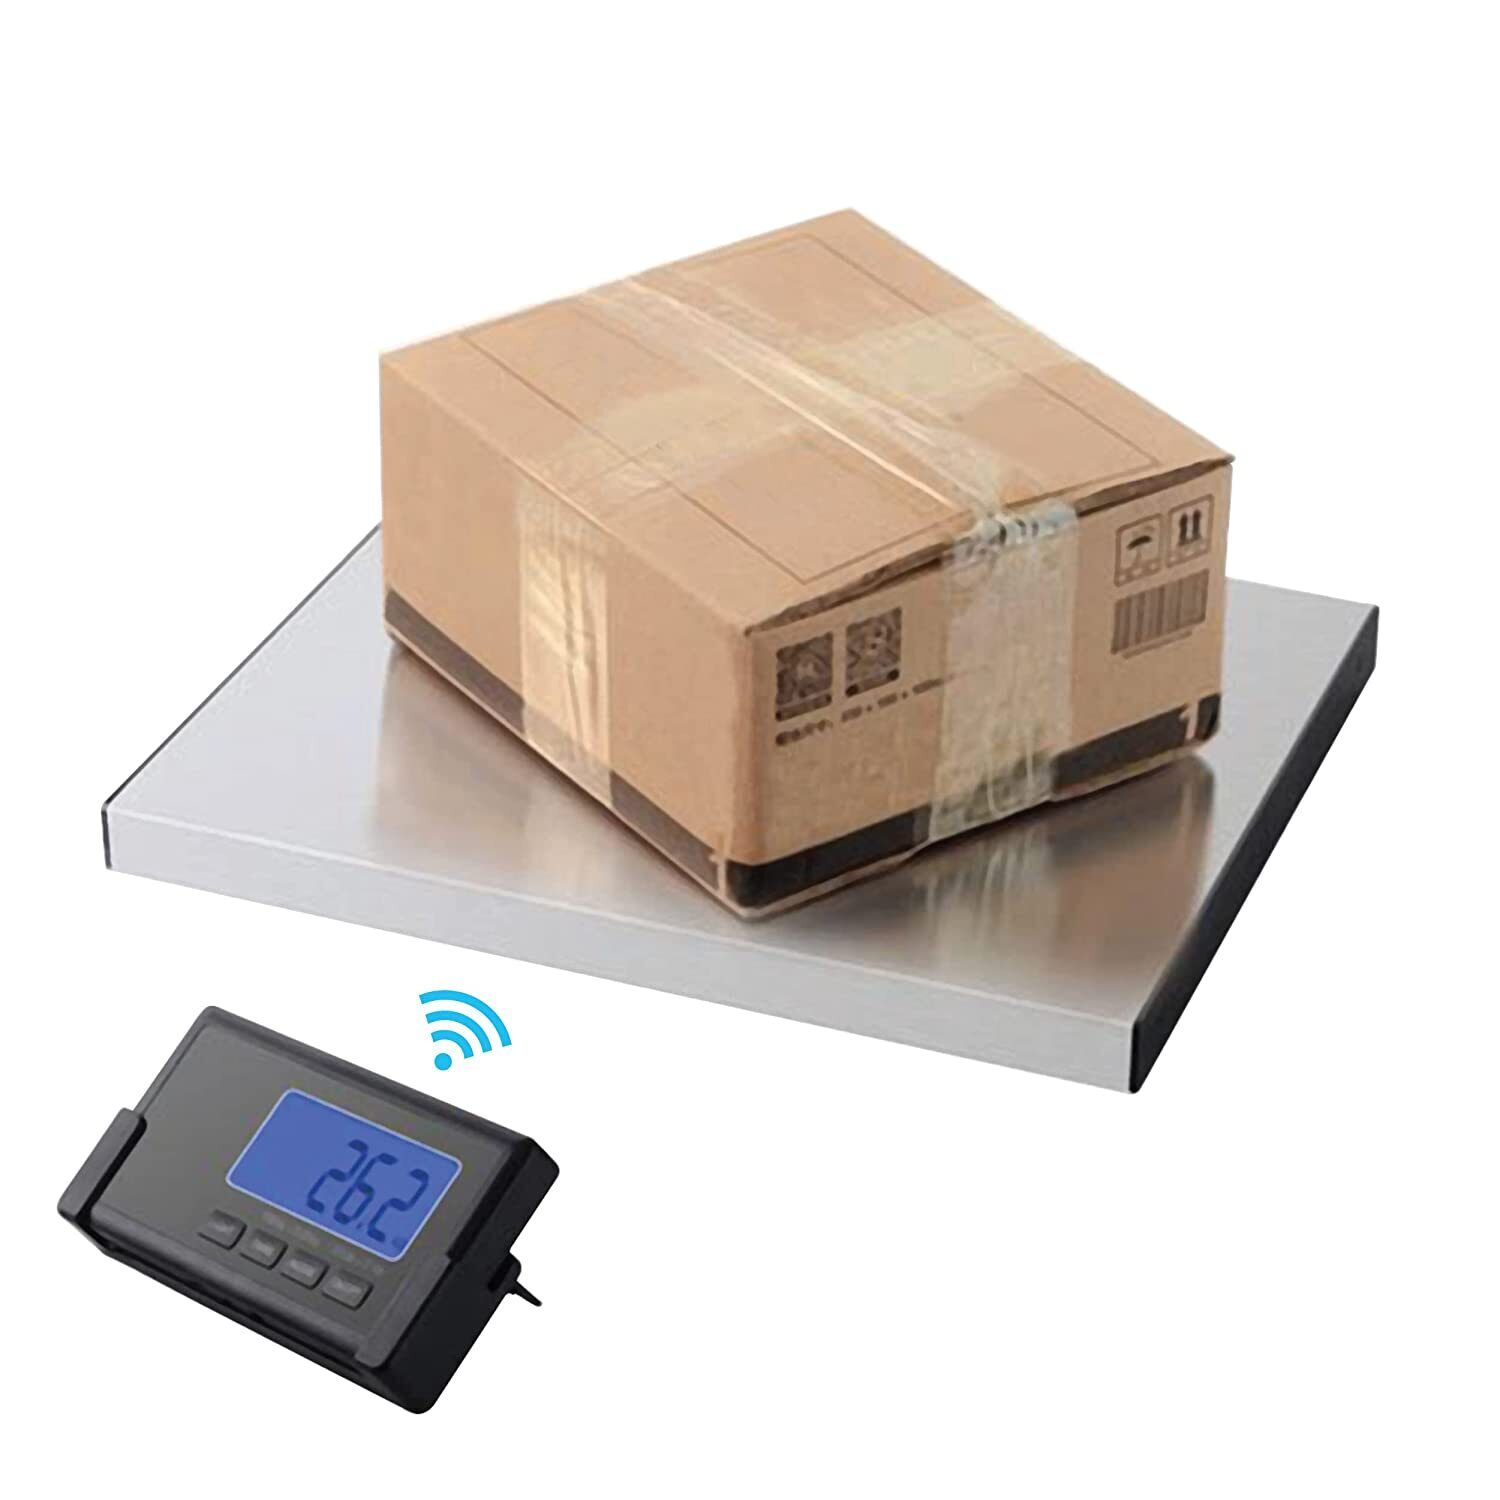 WIRELESS DISPLAY SHIPPING SCALE POSTAL PARCEL SCALE 440 LBS STAINLESS STEEL